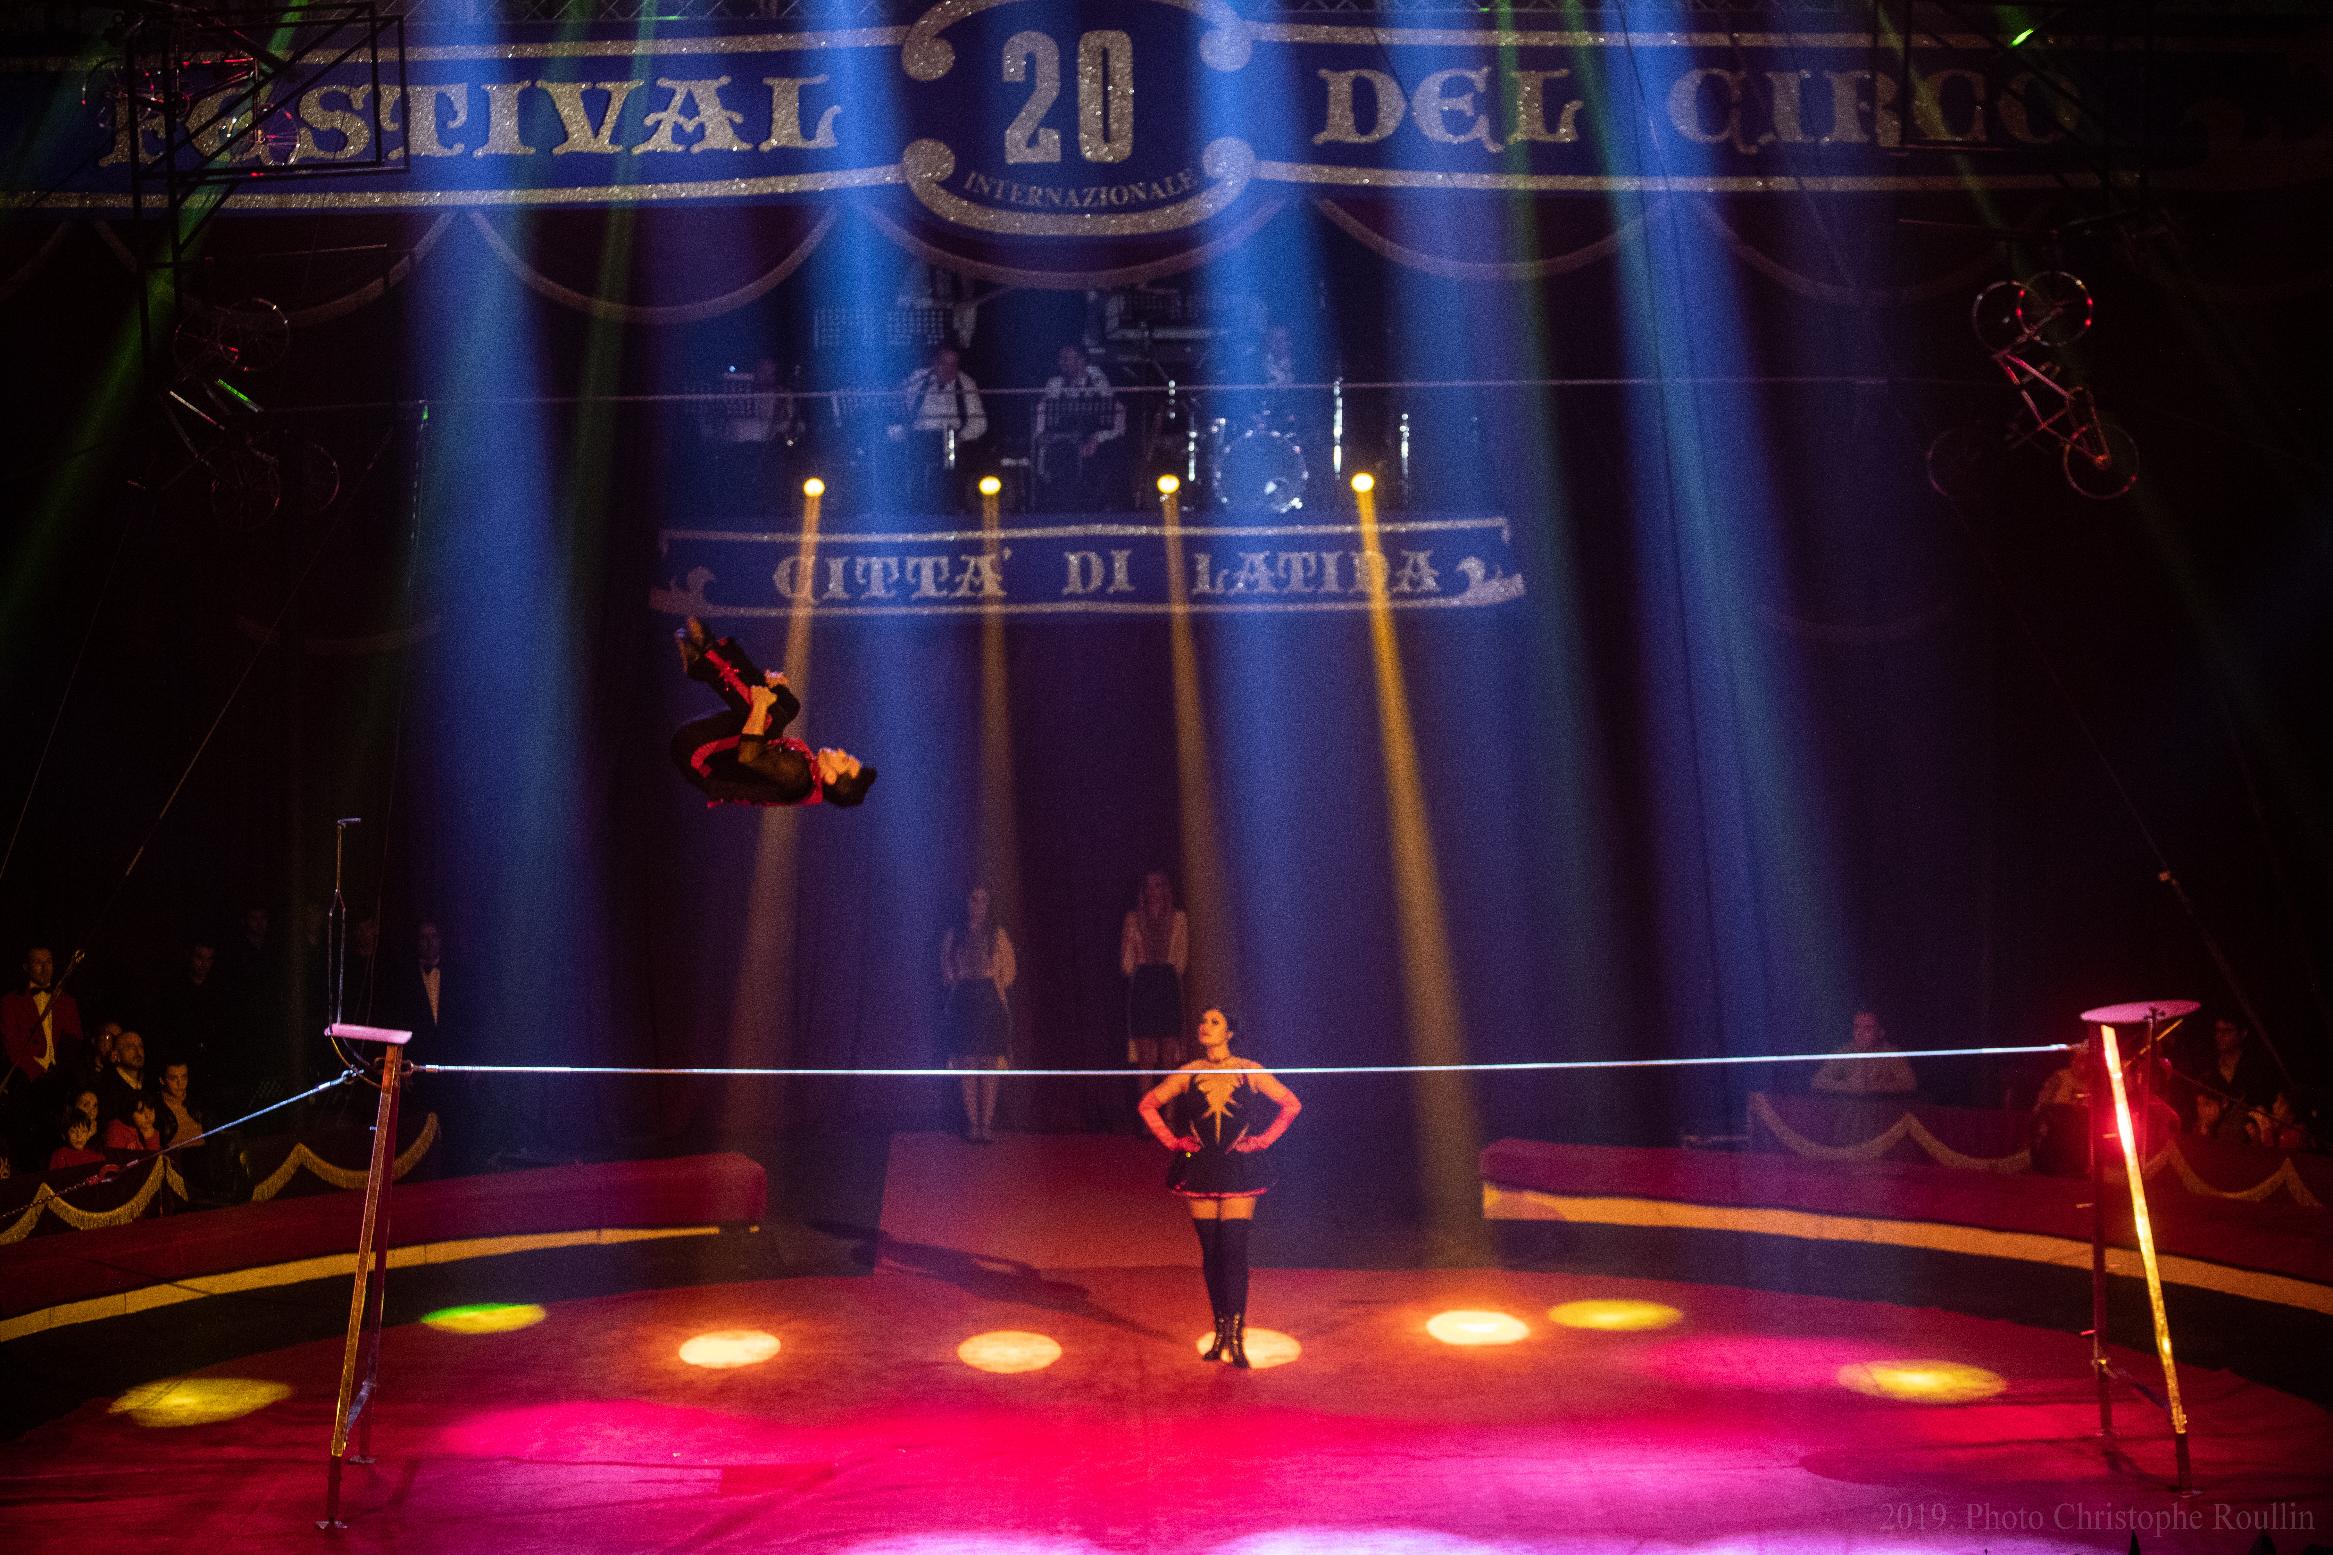 A performer on a stage lit in tones of red and purple does a back flip on the tight wire